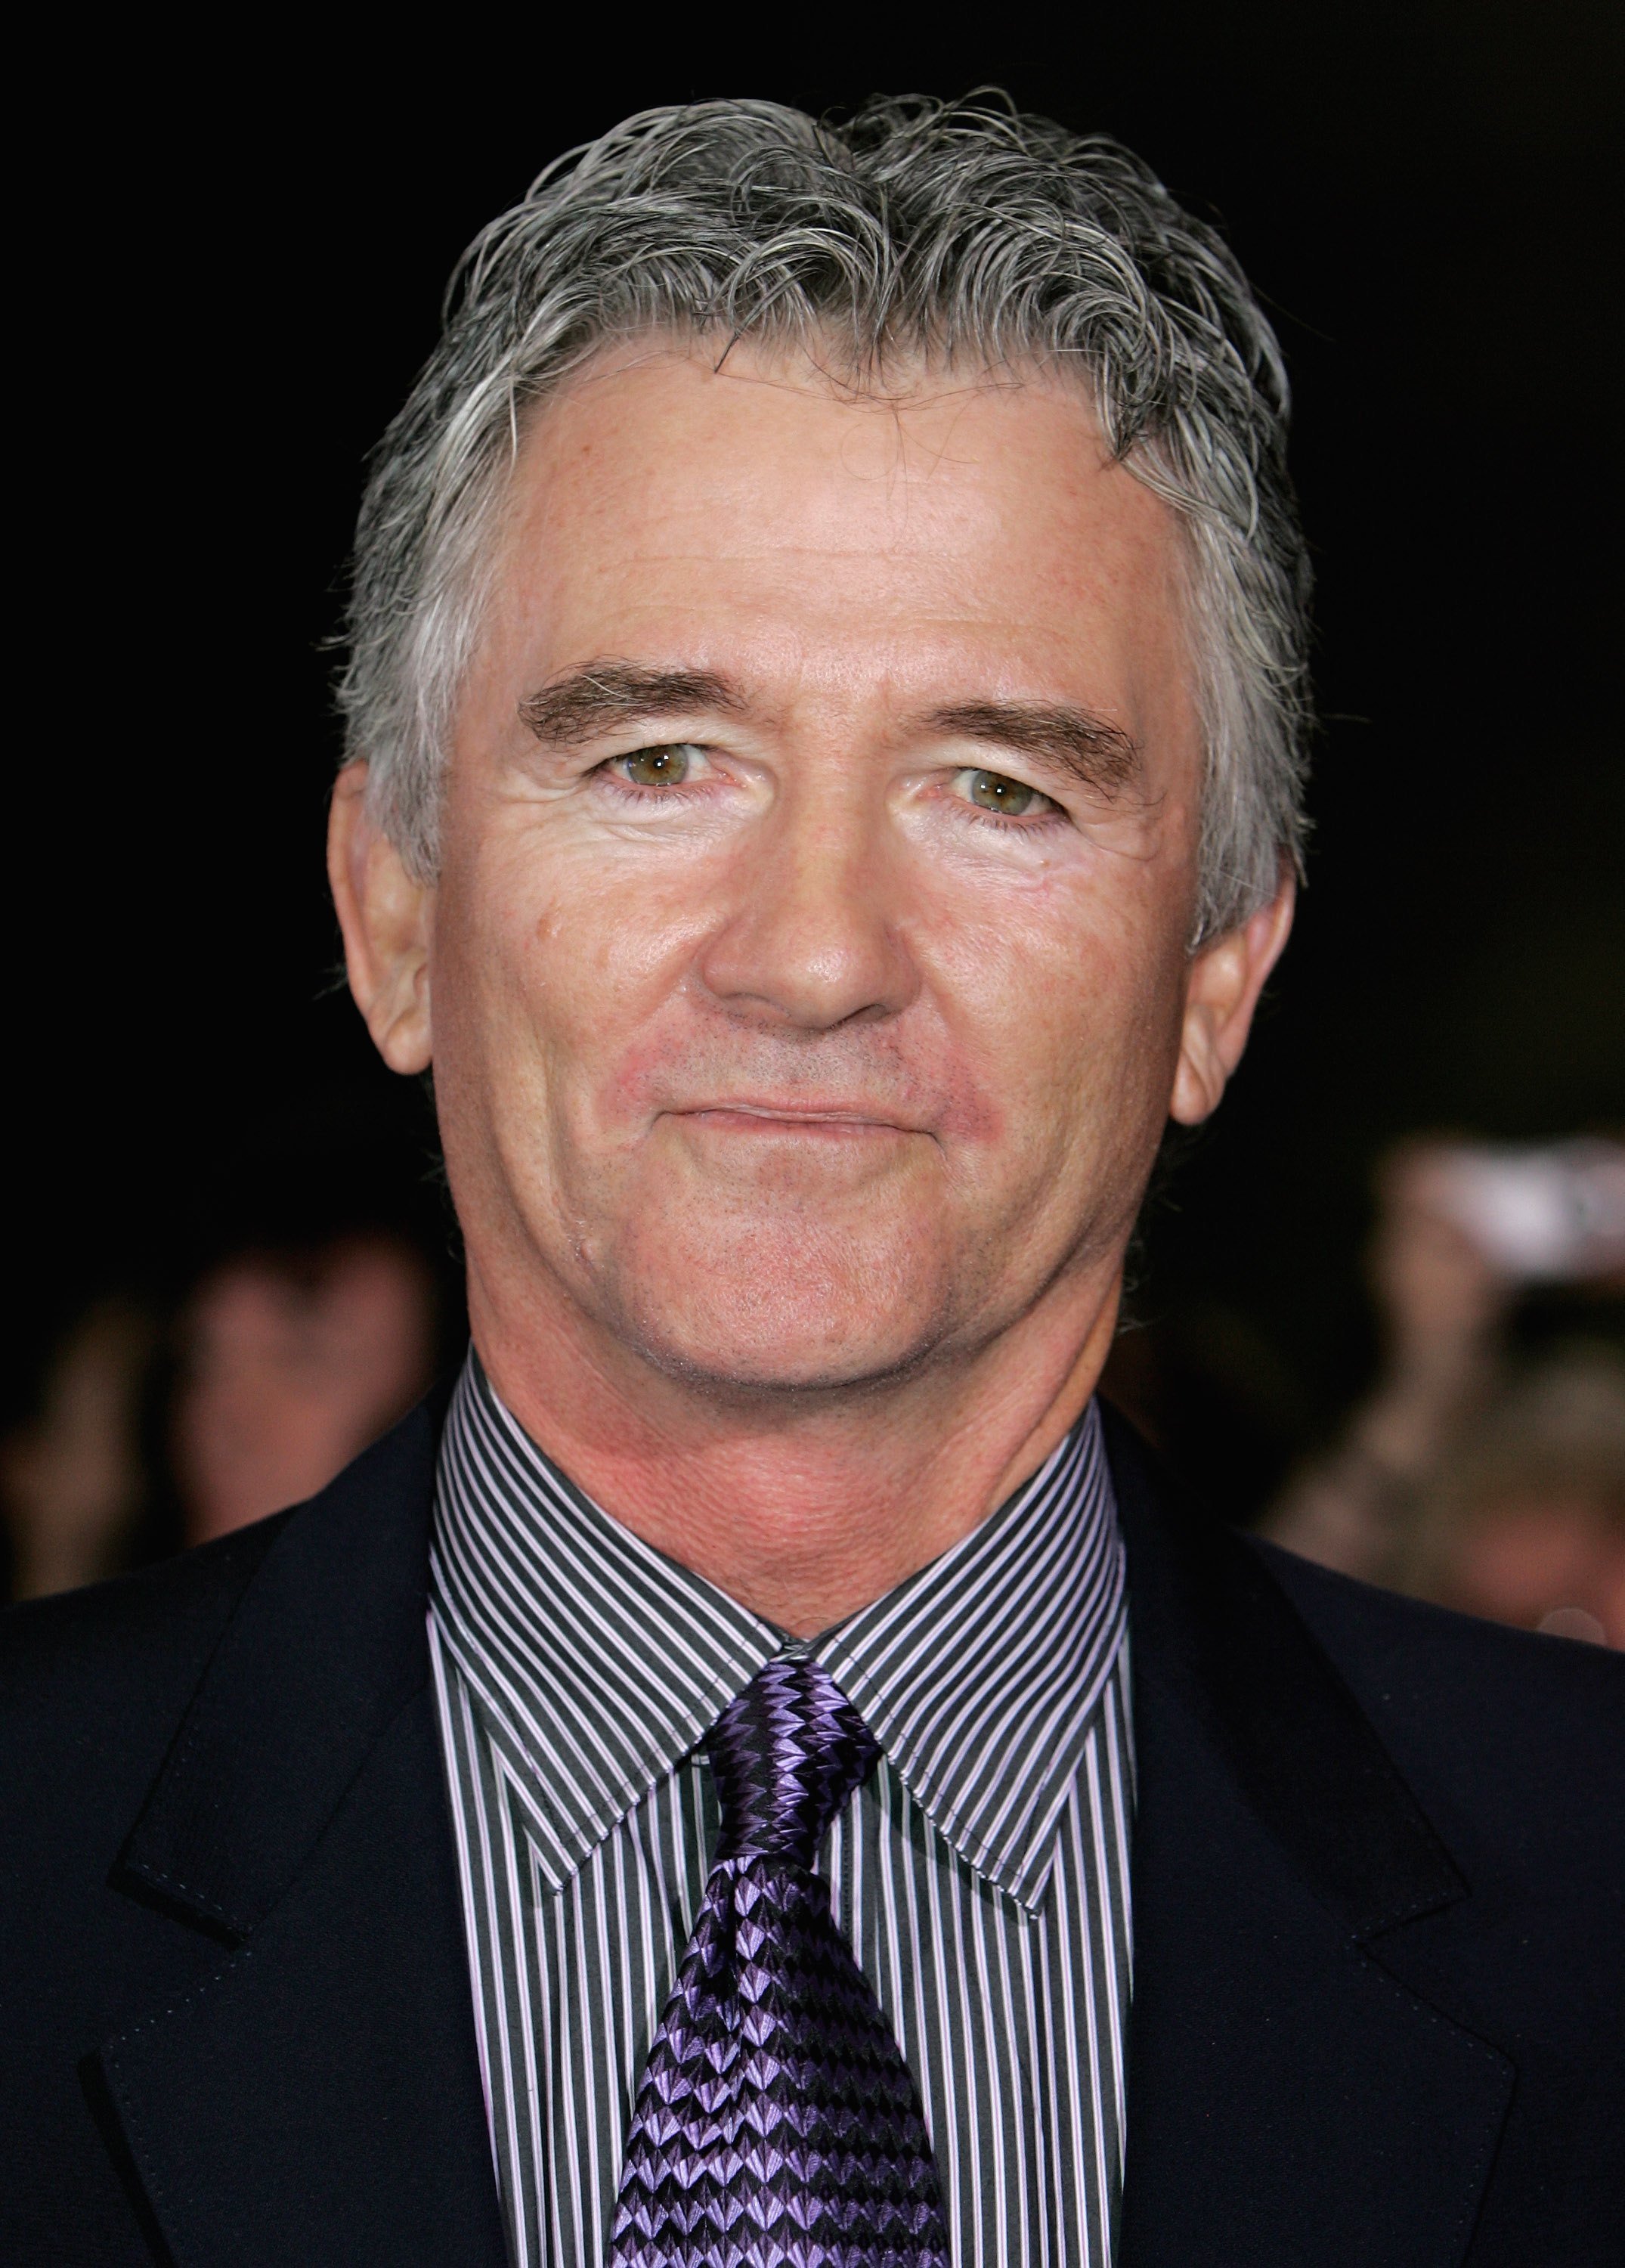 Patrick Duffy on August 26, 2006 in Newport, Wales. | Photo: Getty Images